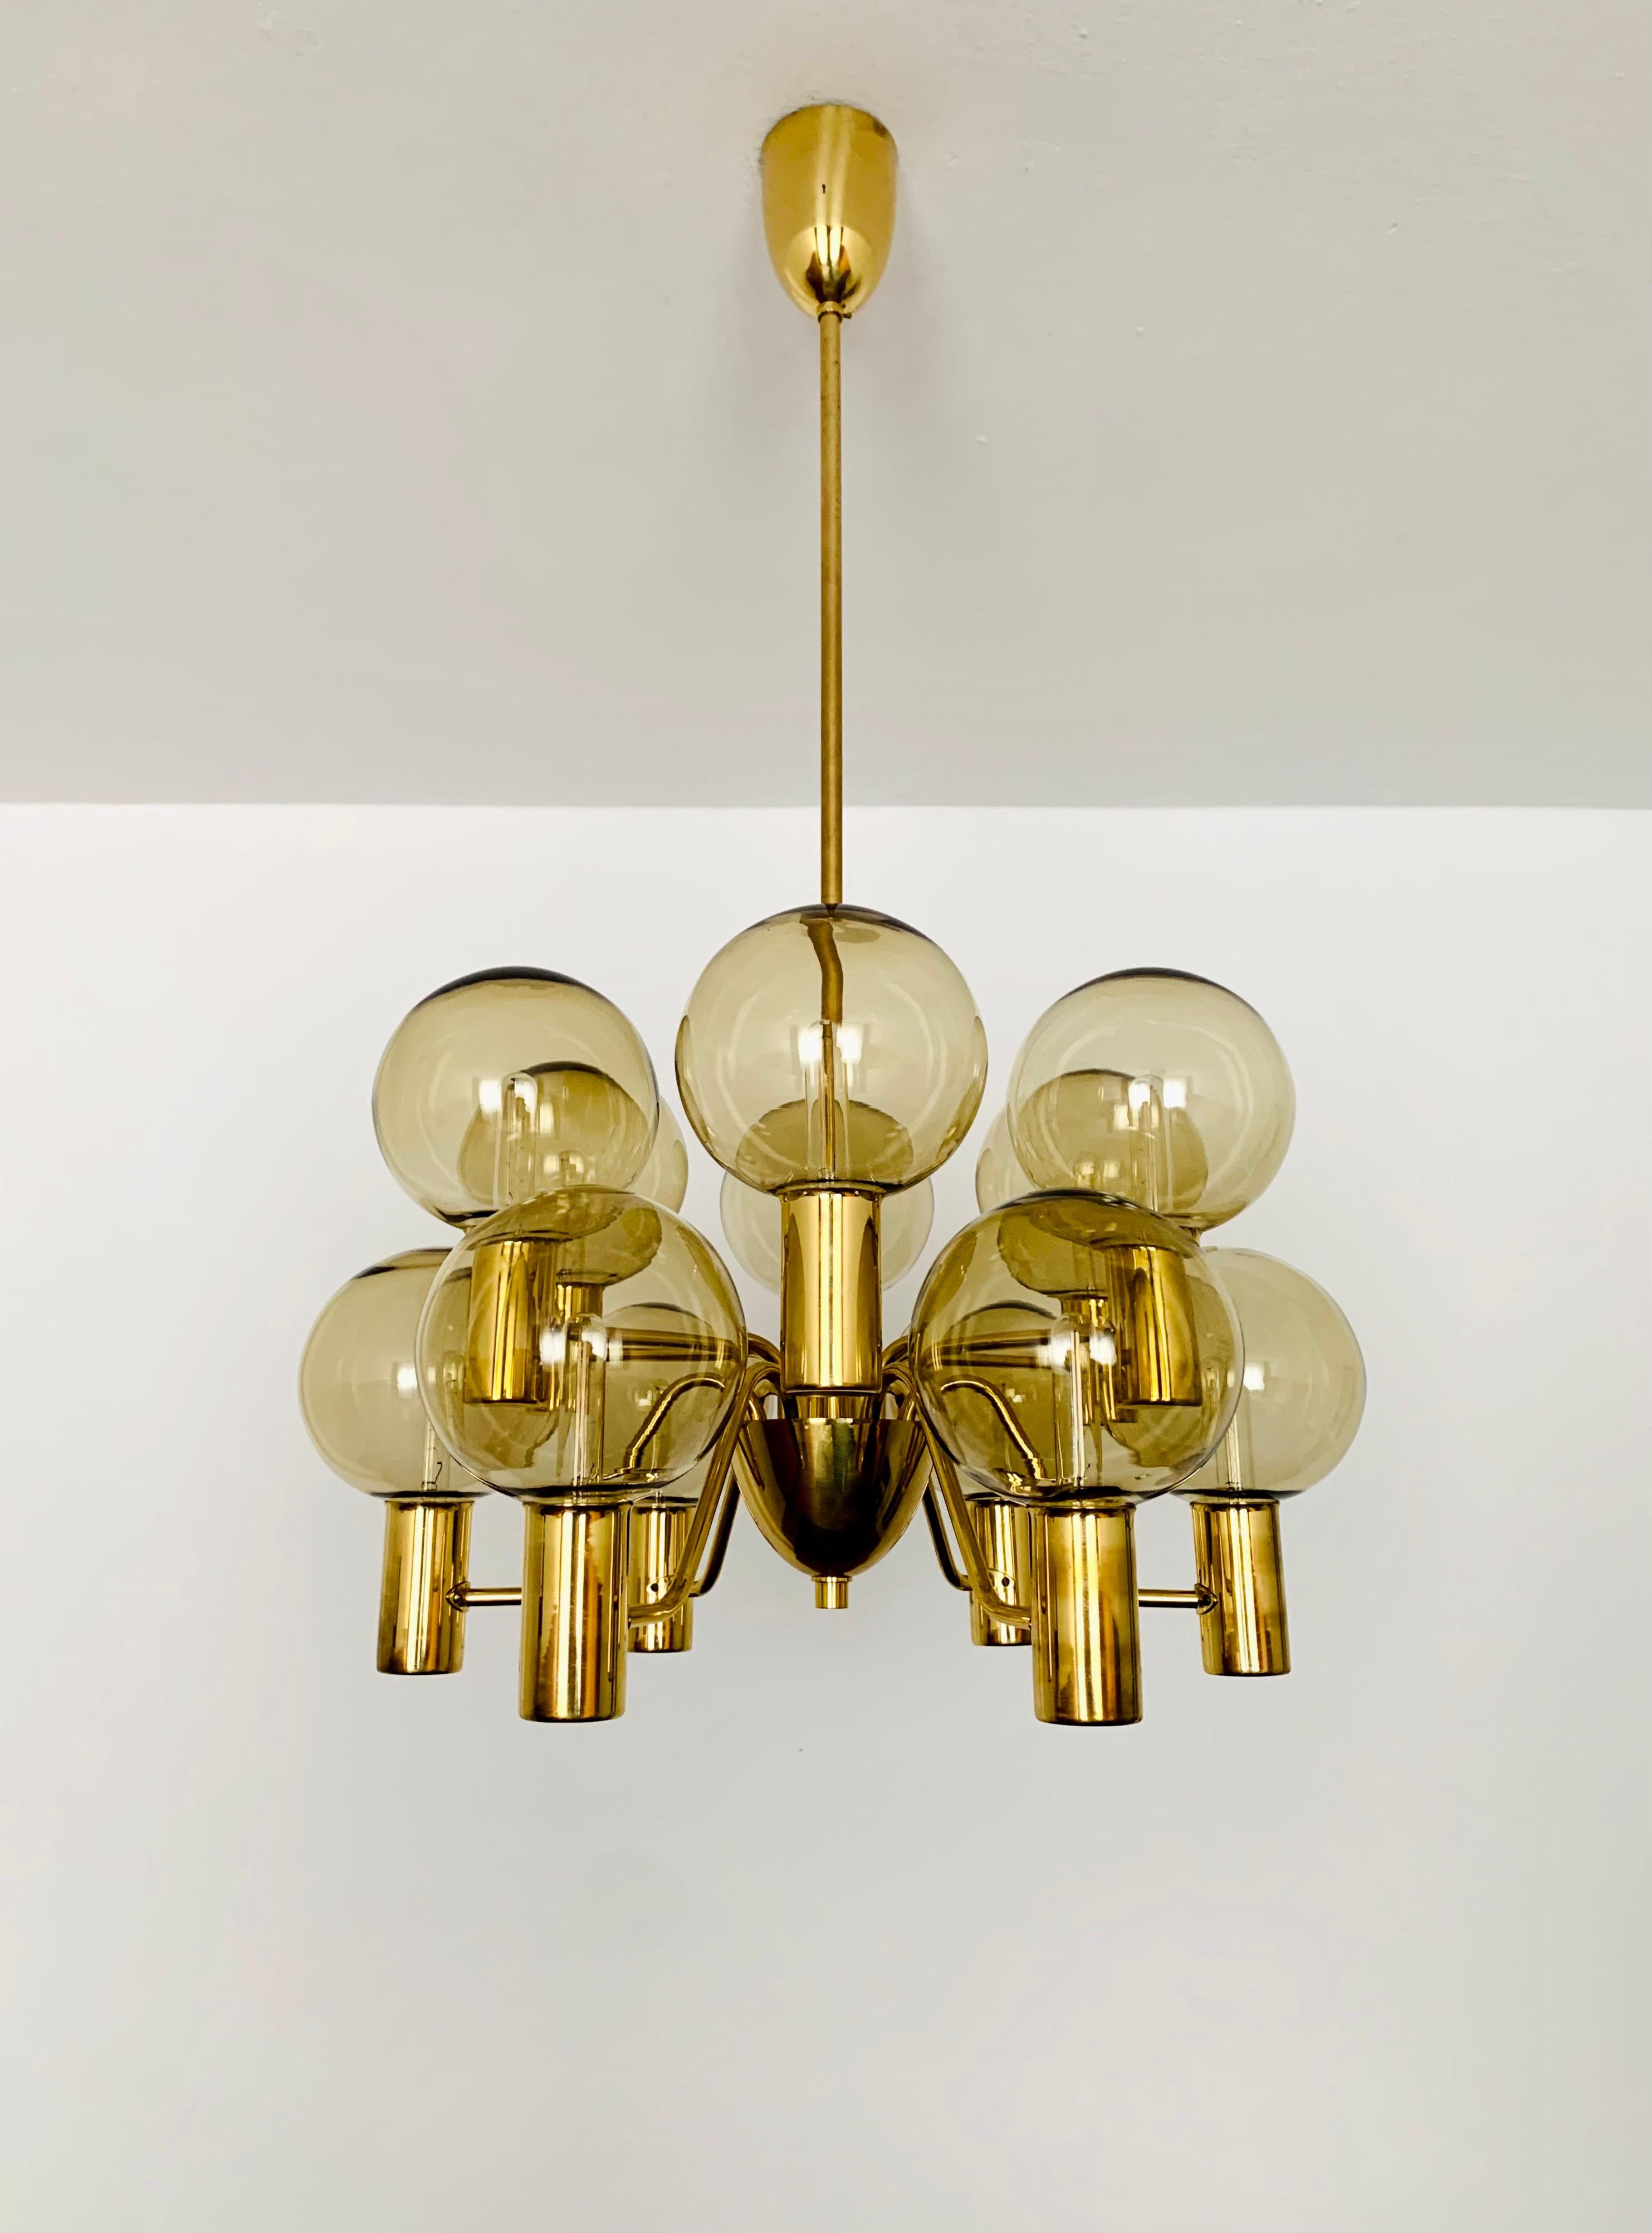 Stunning Patricia chandelier from the 1960s.
Very luxurious design and high quality workmanship.
The lamp is a real asset and an absolute favorite for every home.
A very sparkling light is created.

Manufacturer: Markaryd AB Ellysett
Design: